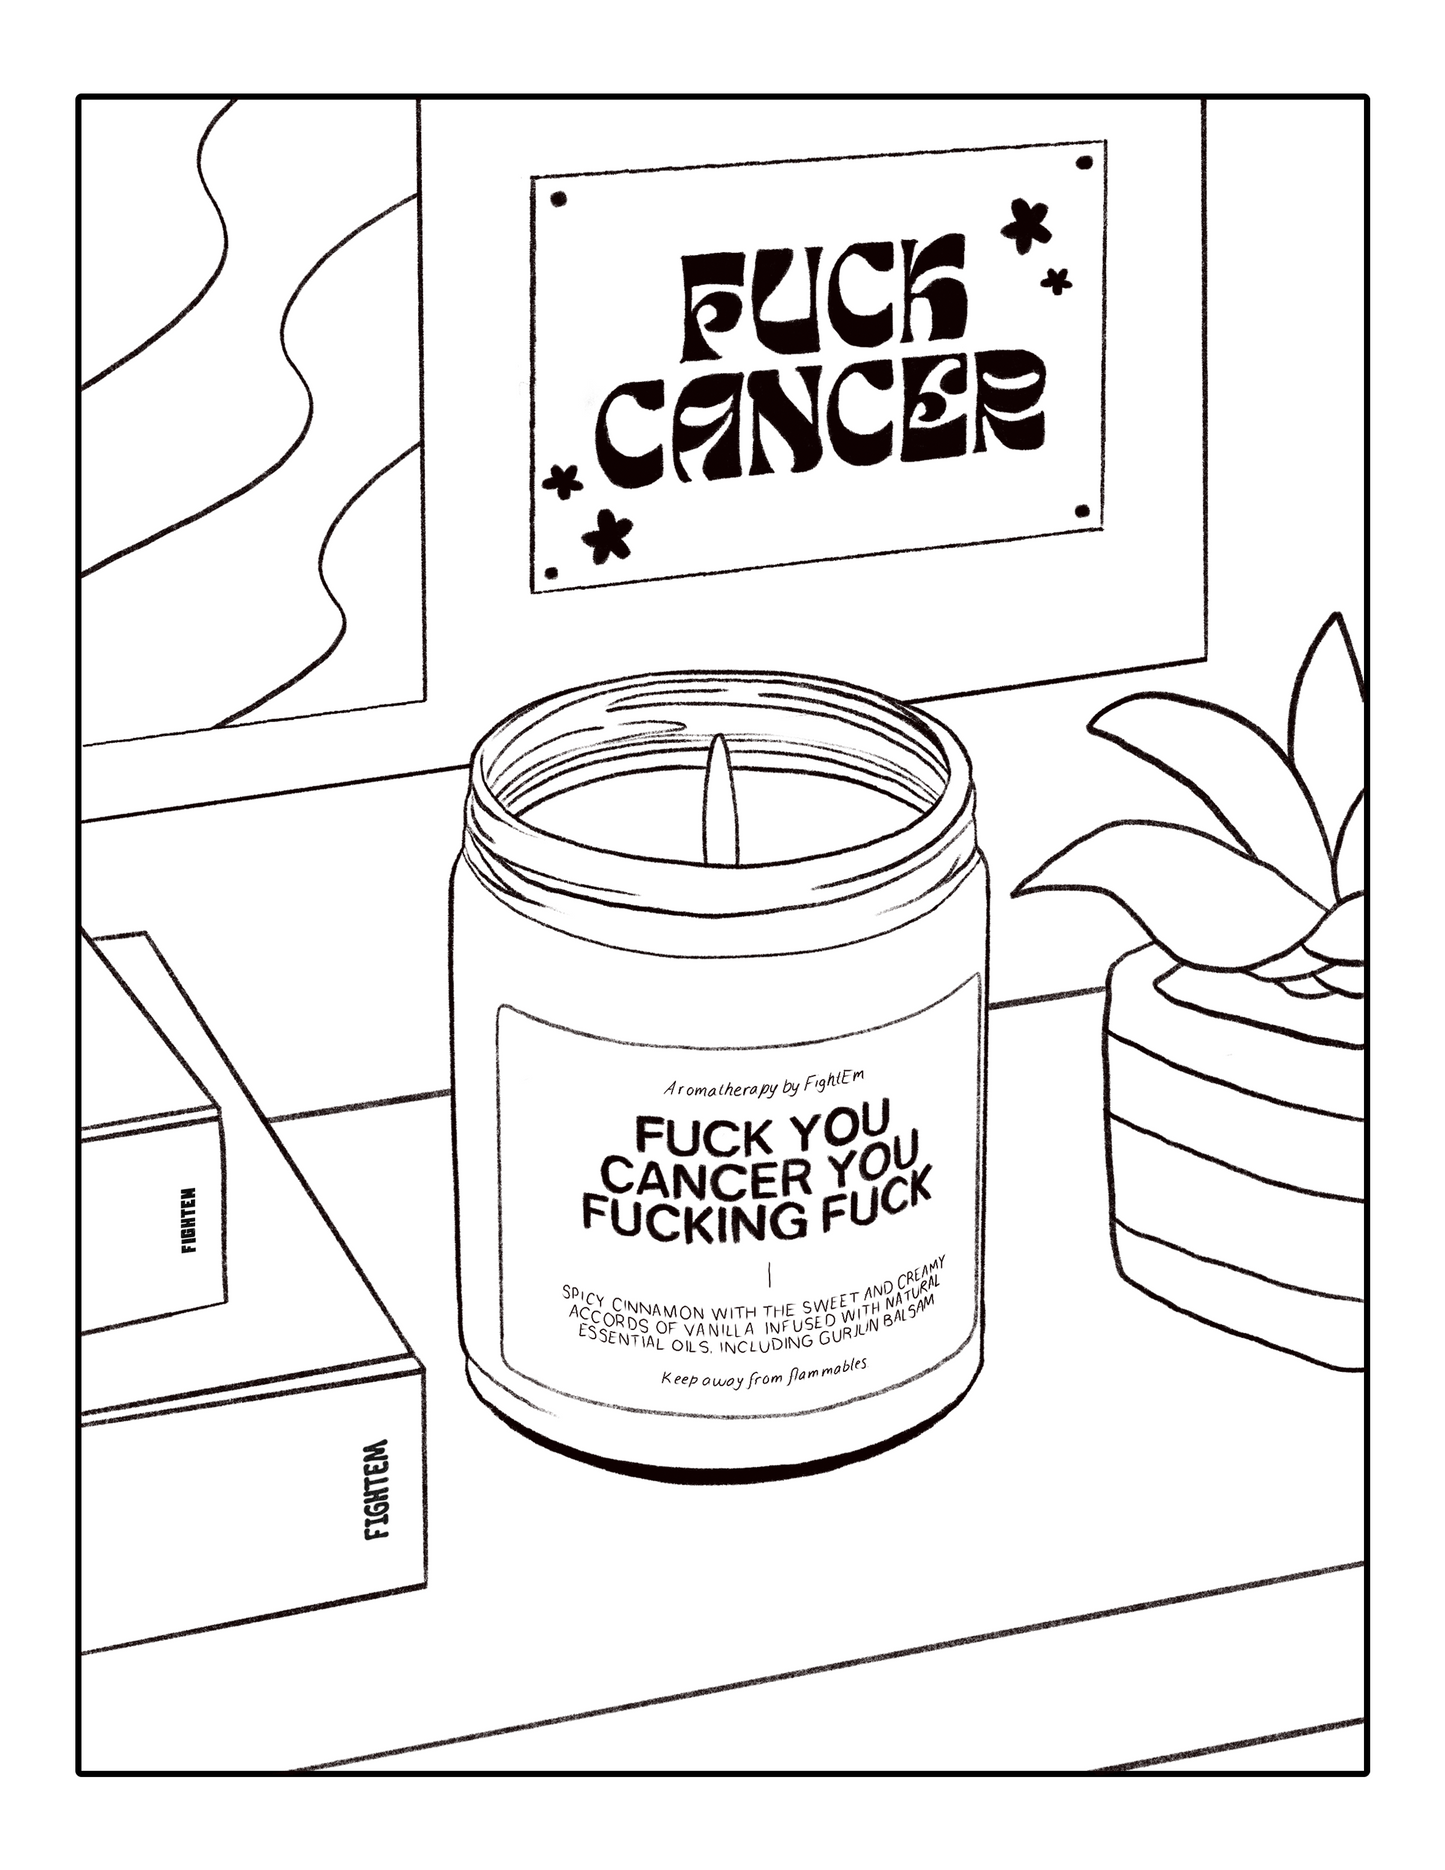 FightEm Coloring Page 1